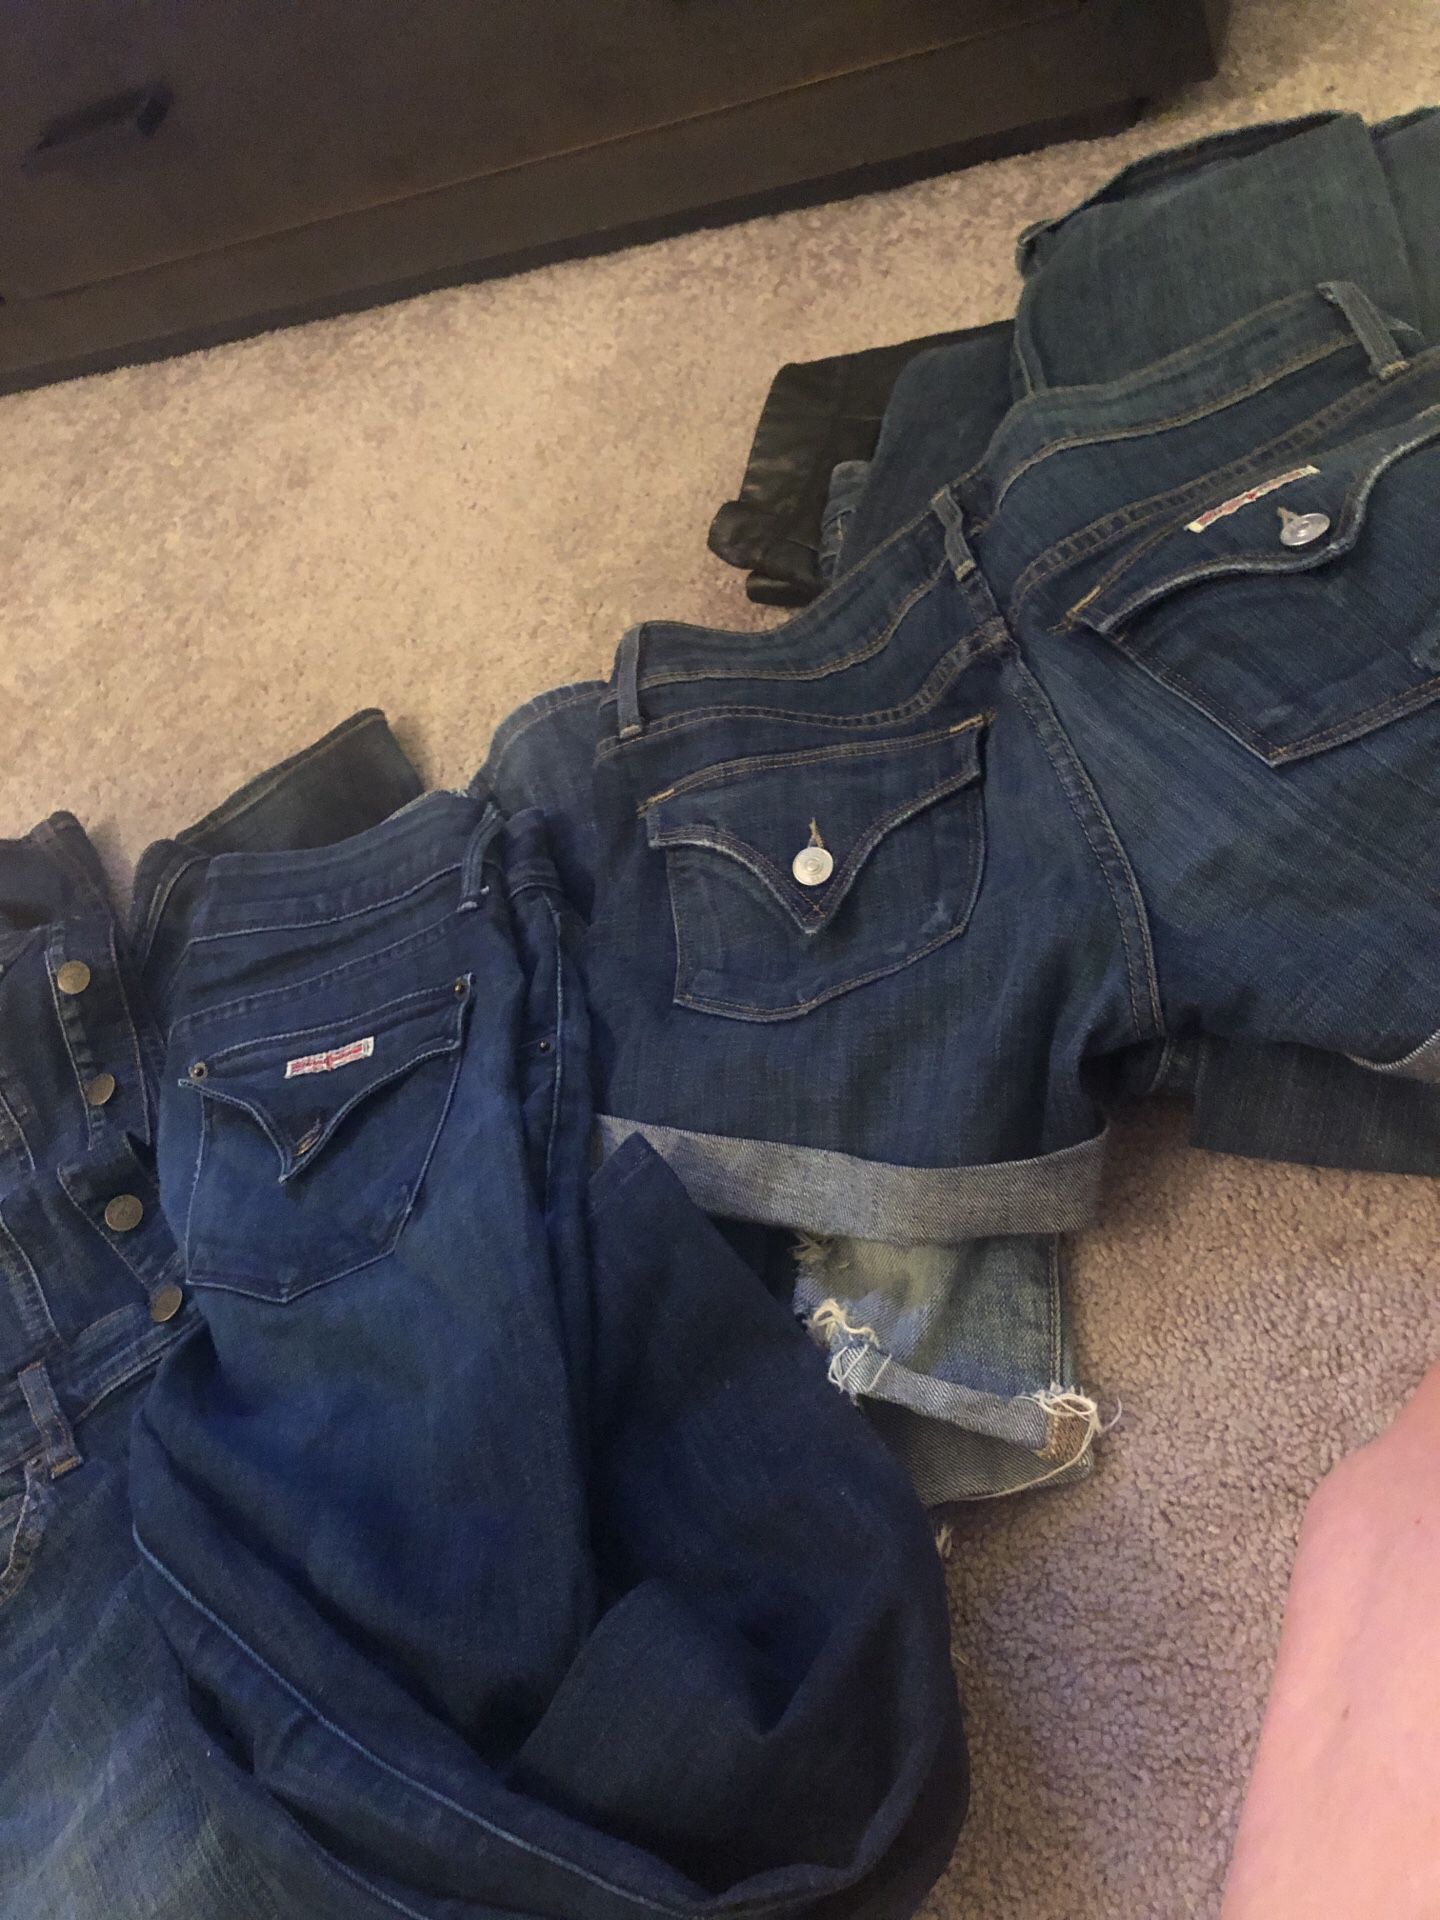 Hudson and lucky brand jeans